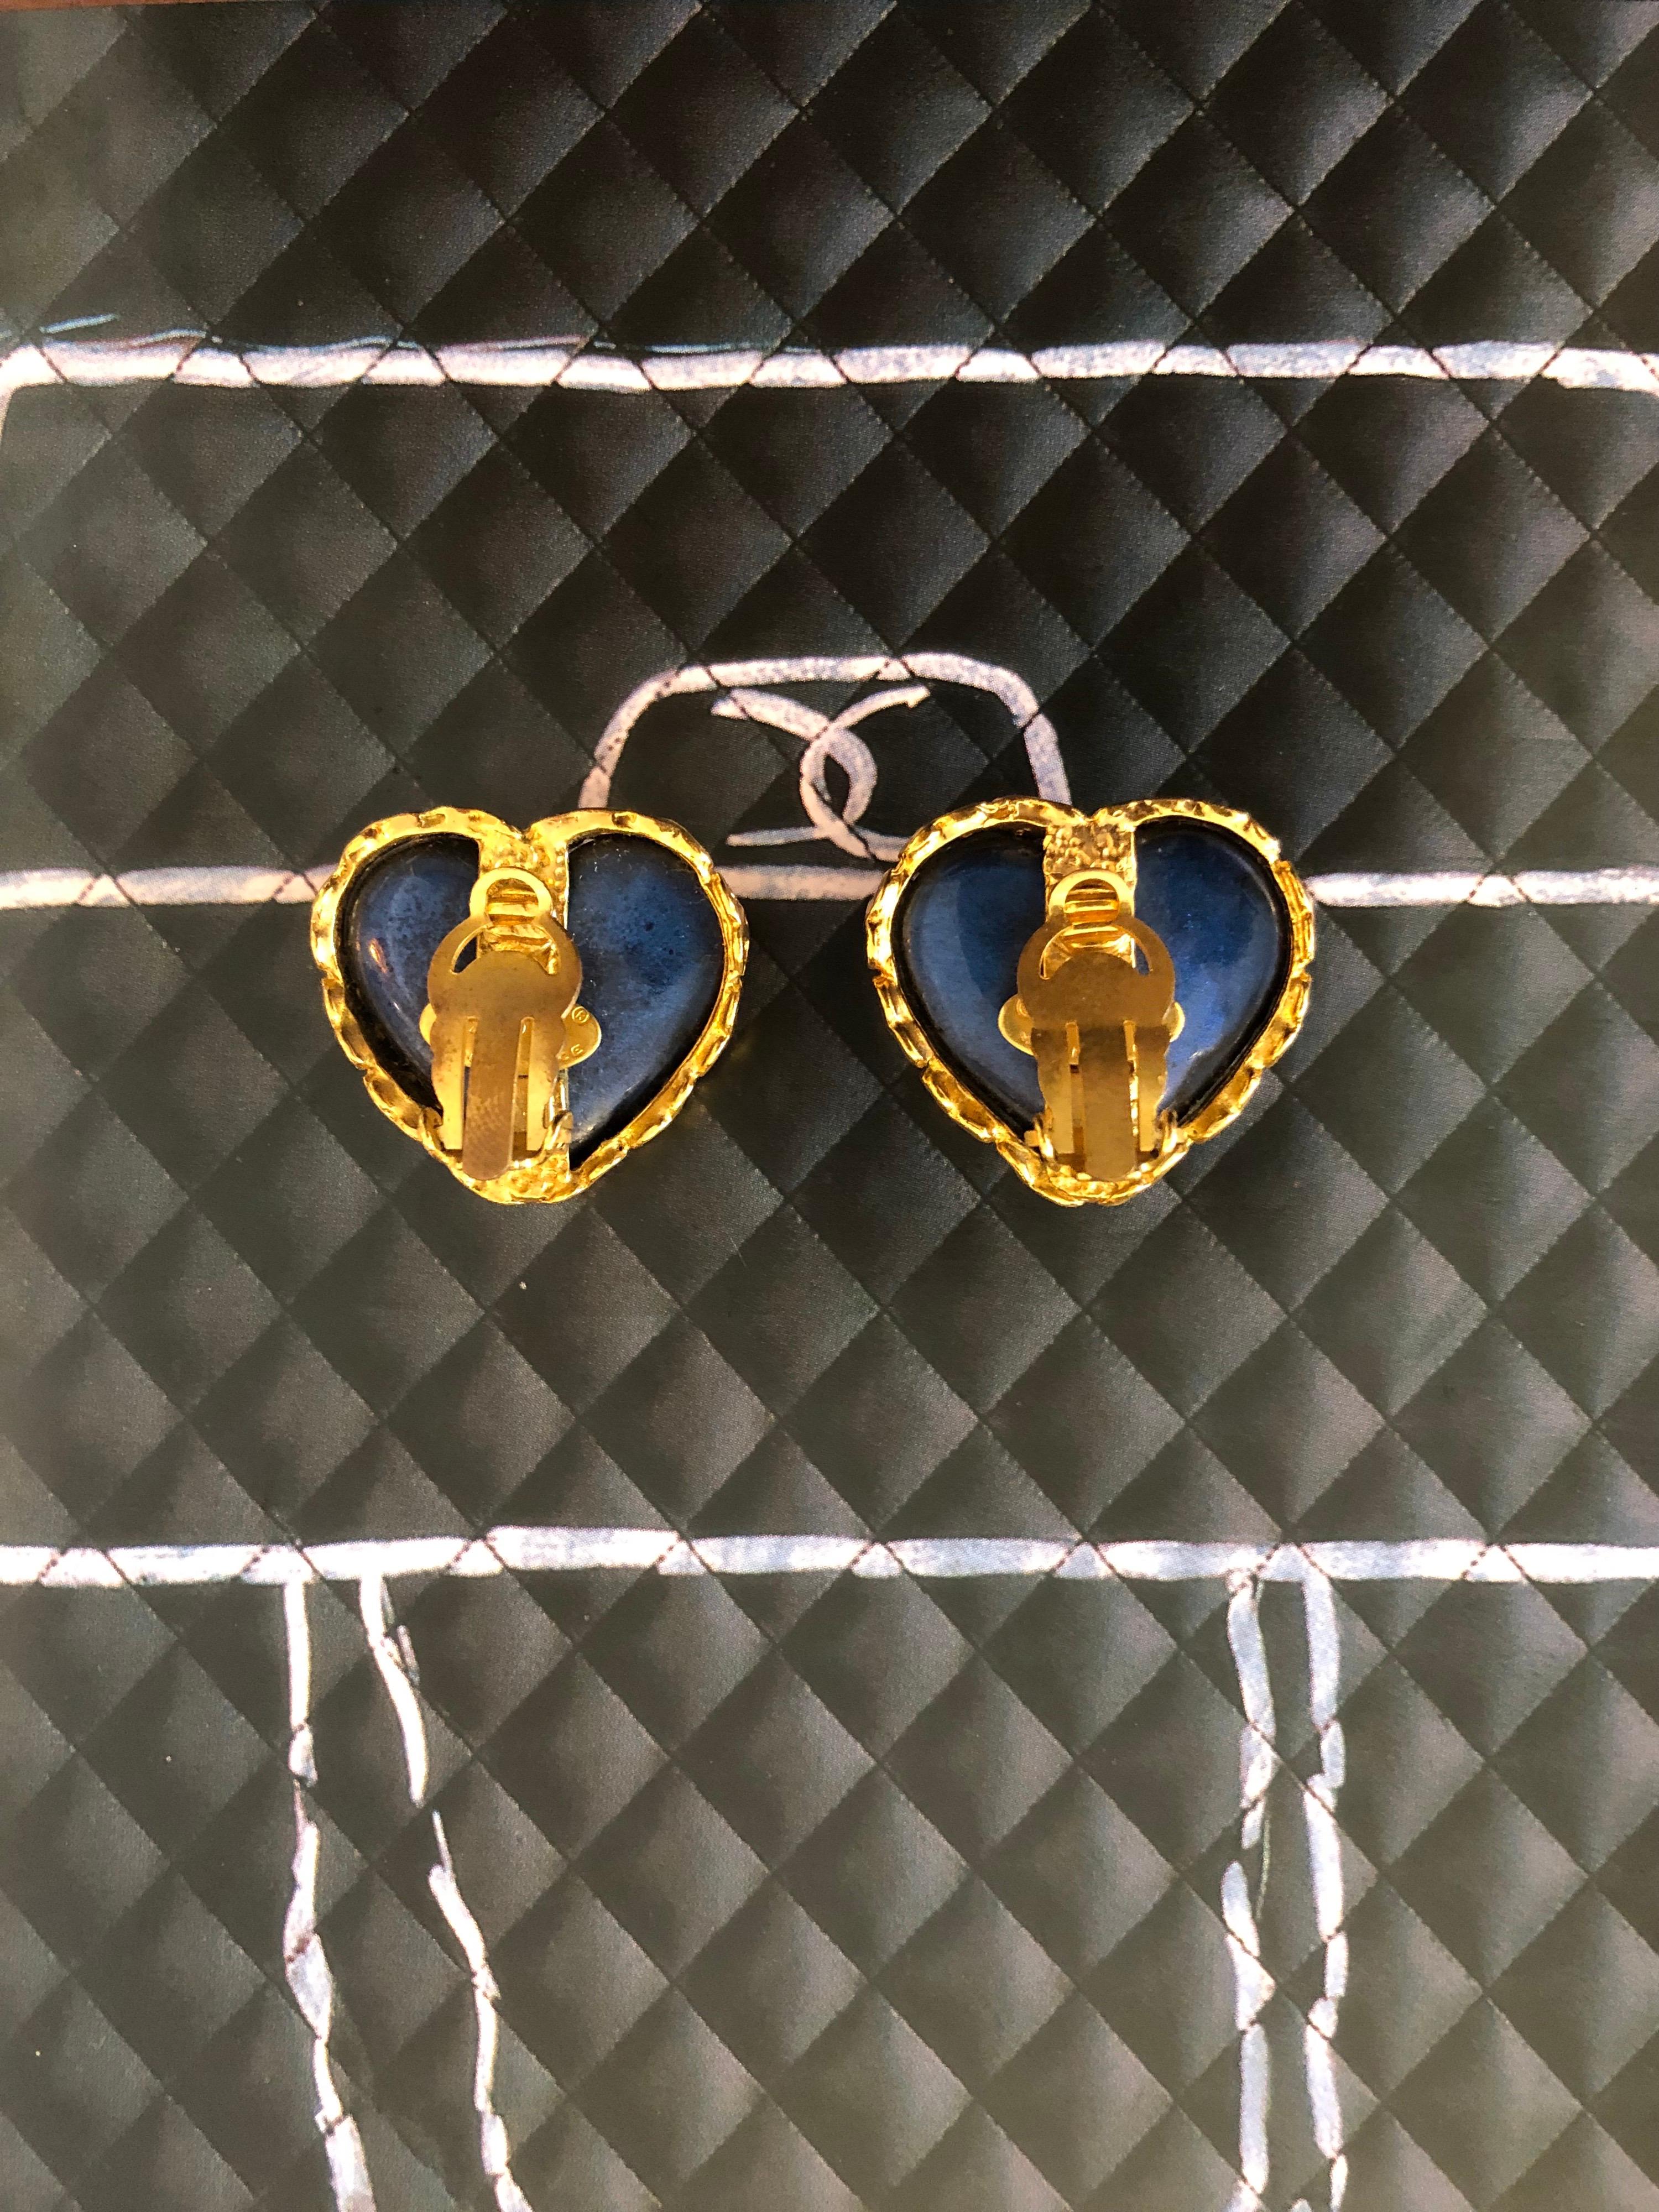 Early 1990s Chanel gripoix heart earrings in midnight blue adorned with gold toned interlocking CC frame. Designed by Victoire de Castellane. Stamped CHANEL 28 made in France. Measures 2.9 x 2.9 cm. Come with box.

Condition - Minor signs of wear.